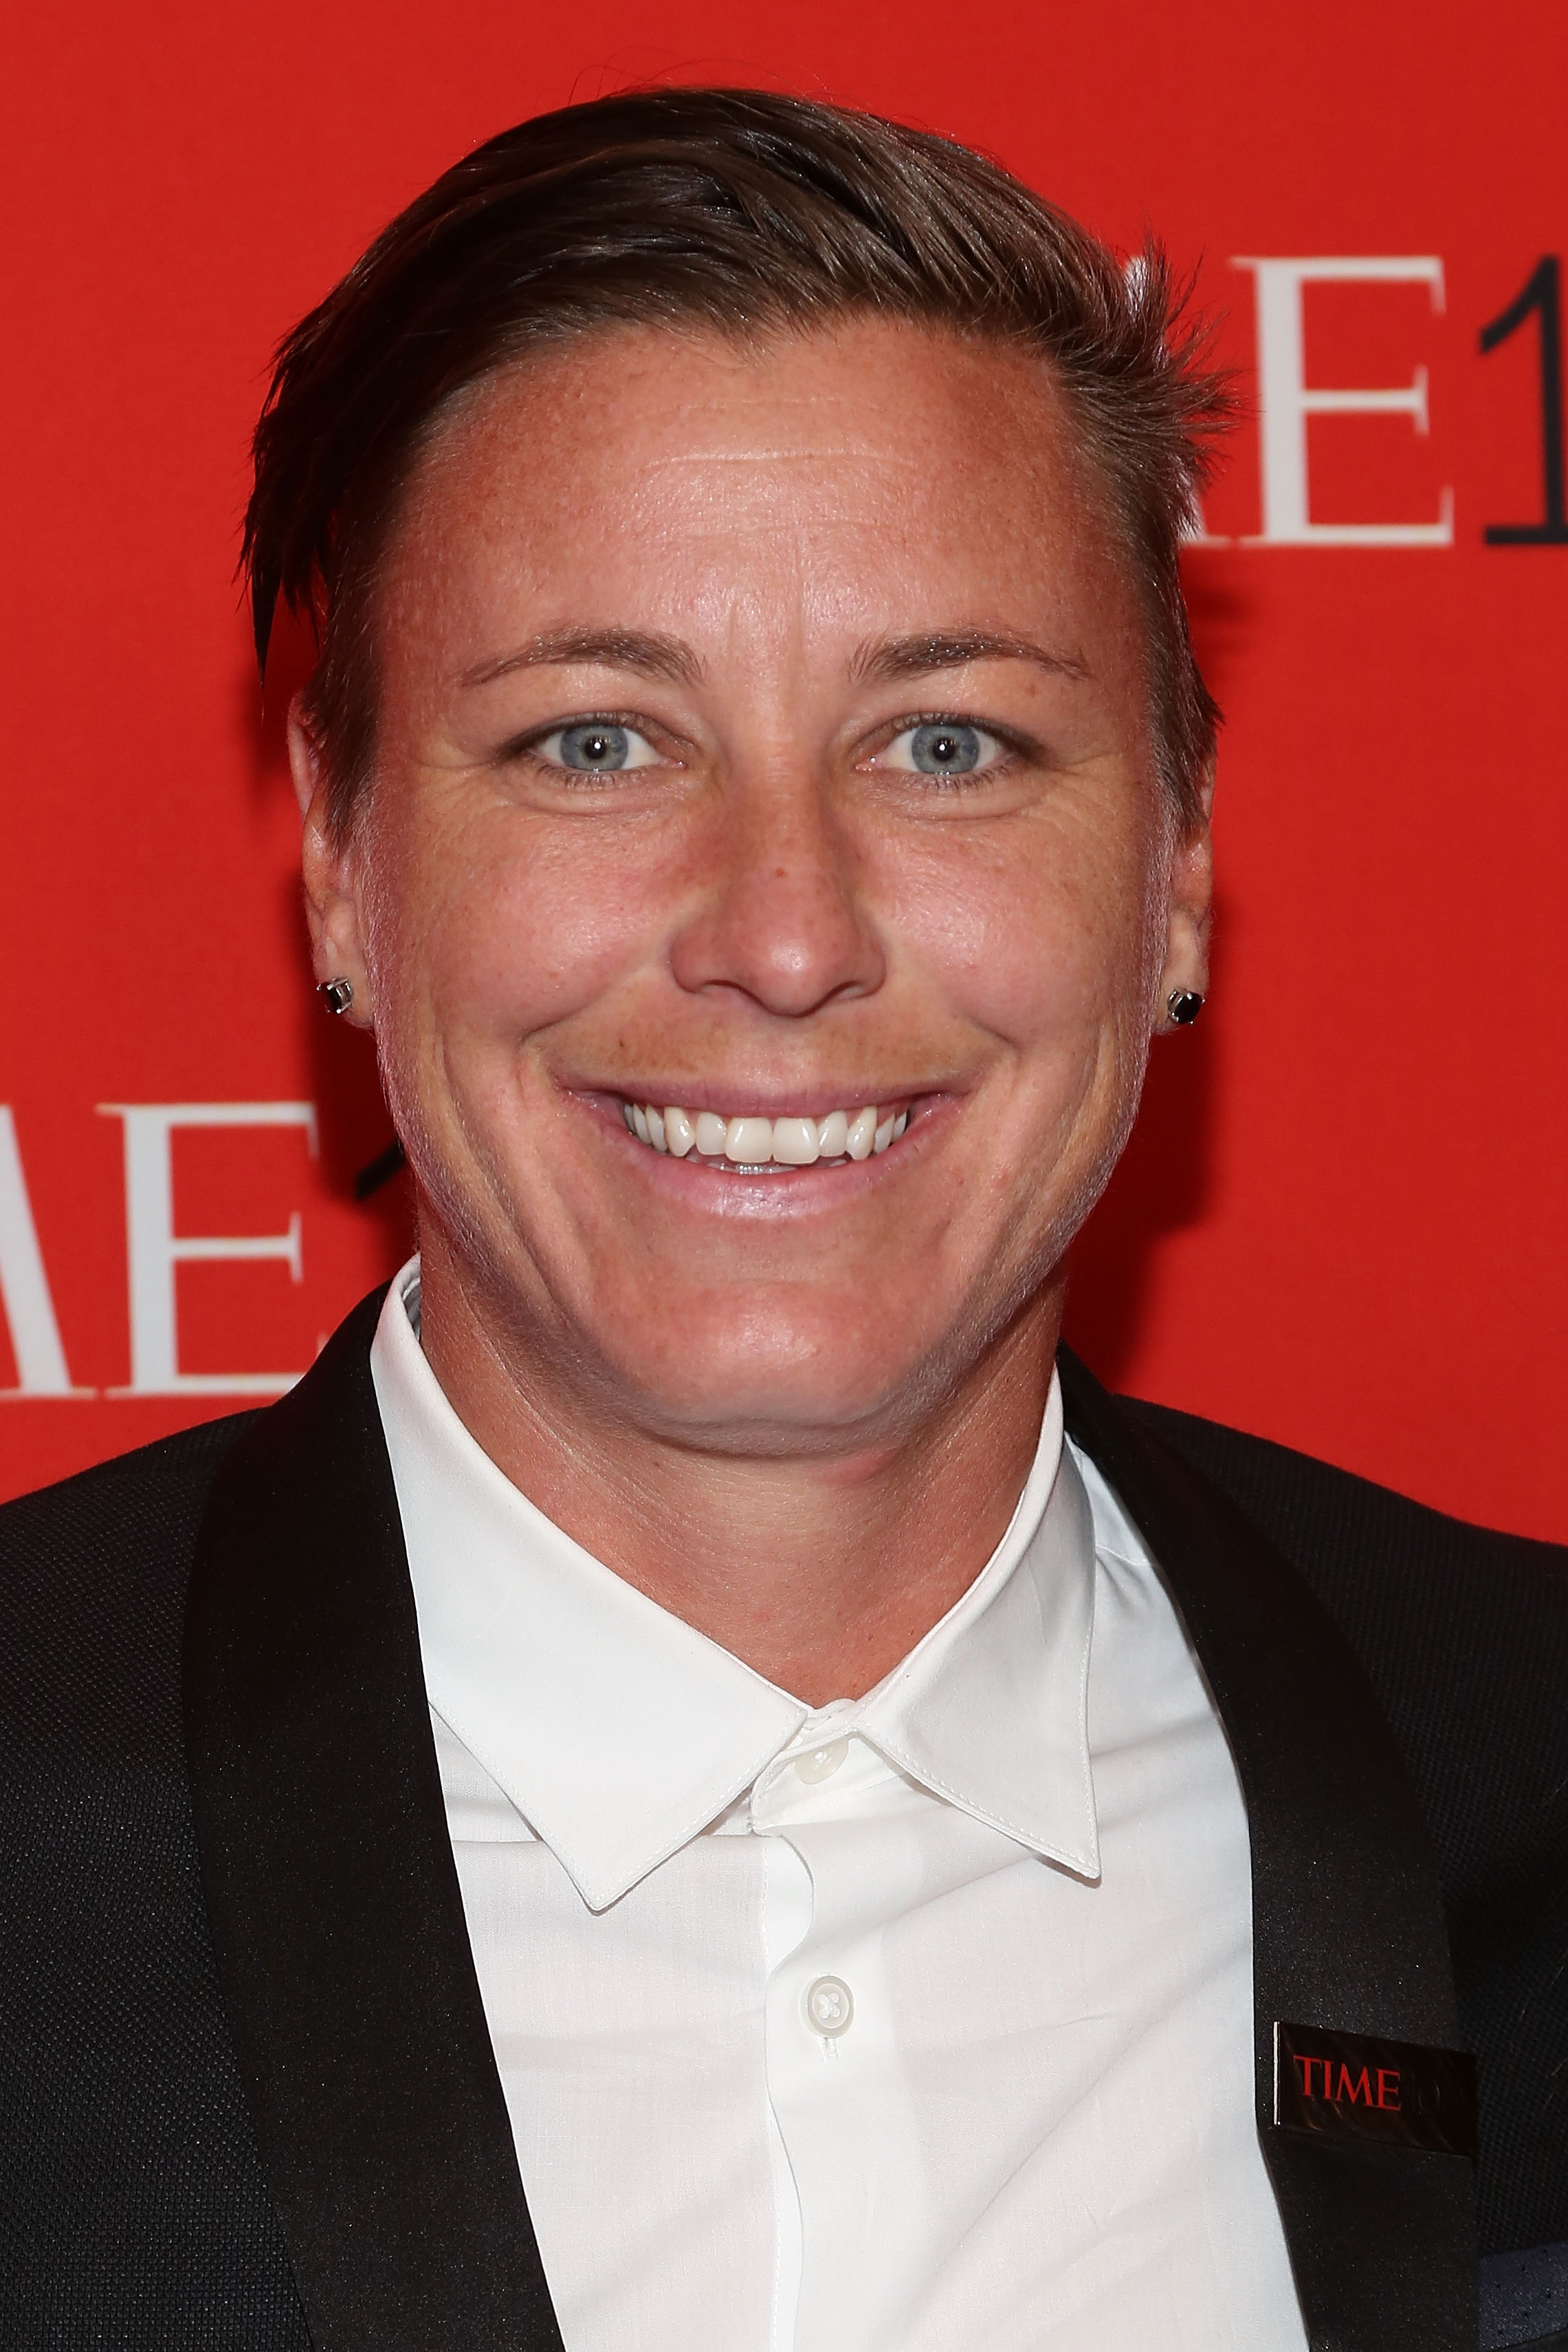 Abby Wambach at the 2015 Time 100 Gala in New York City on April 21, 2015.